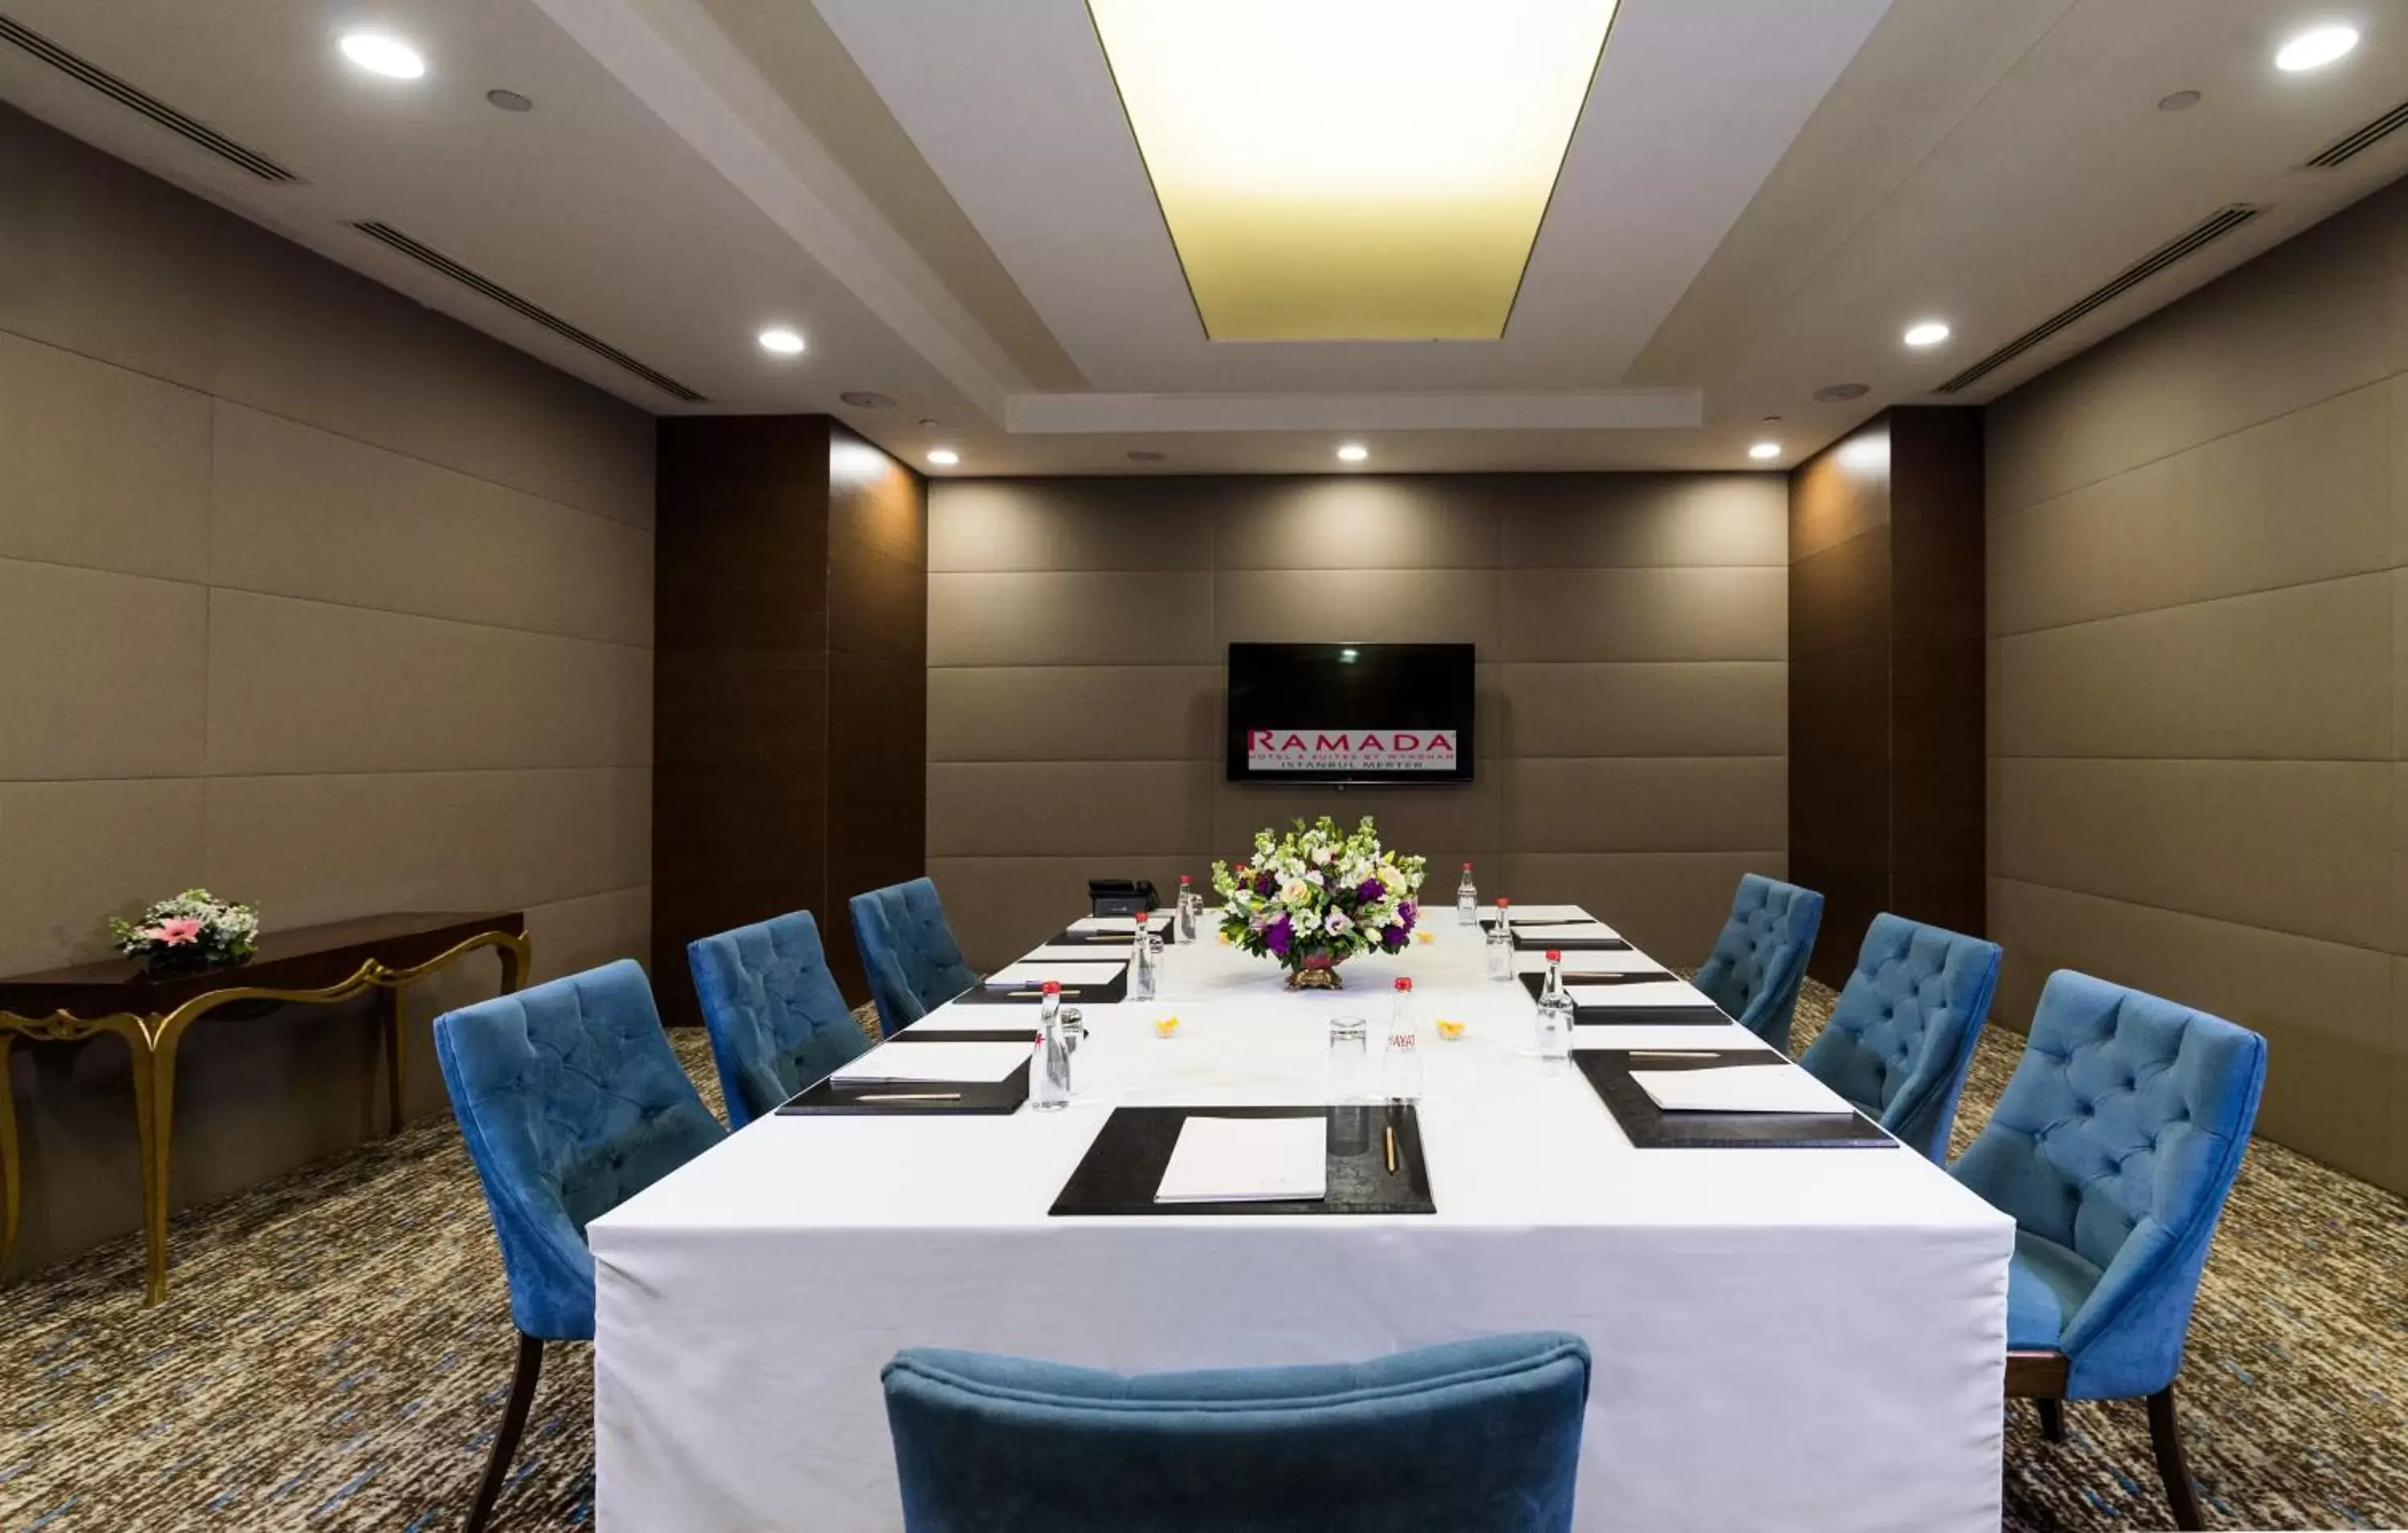 Banquet/Function facilities in Ramada Hotel & Suites by Wyndham Istanbul Merter